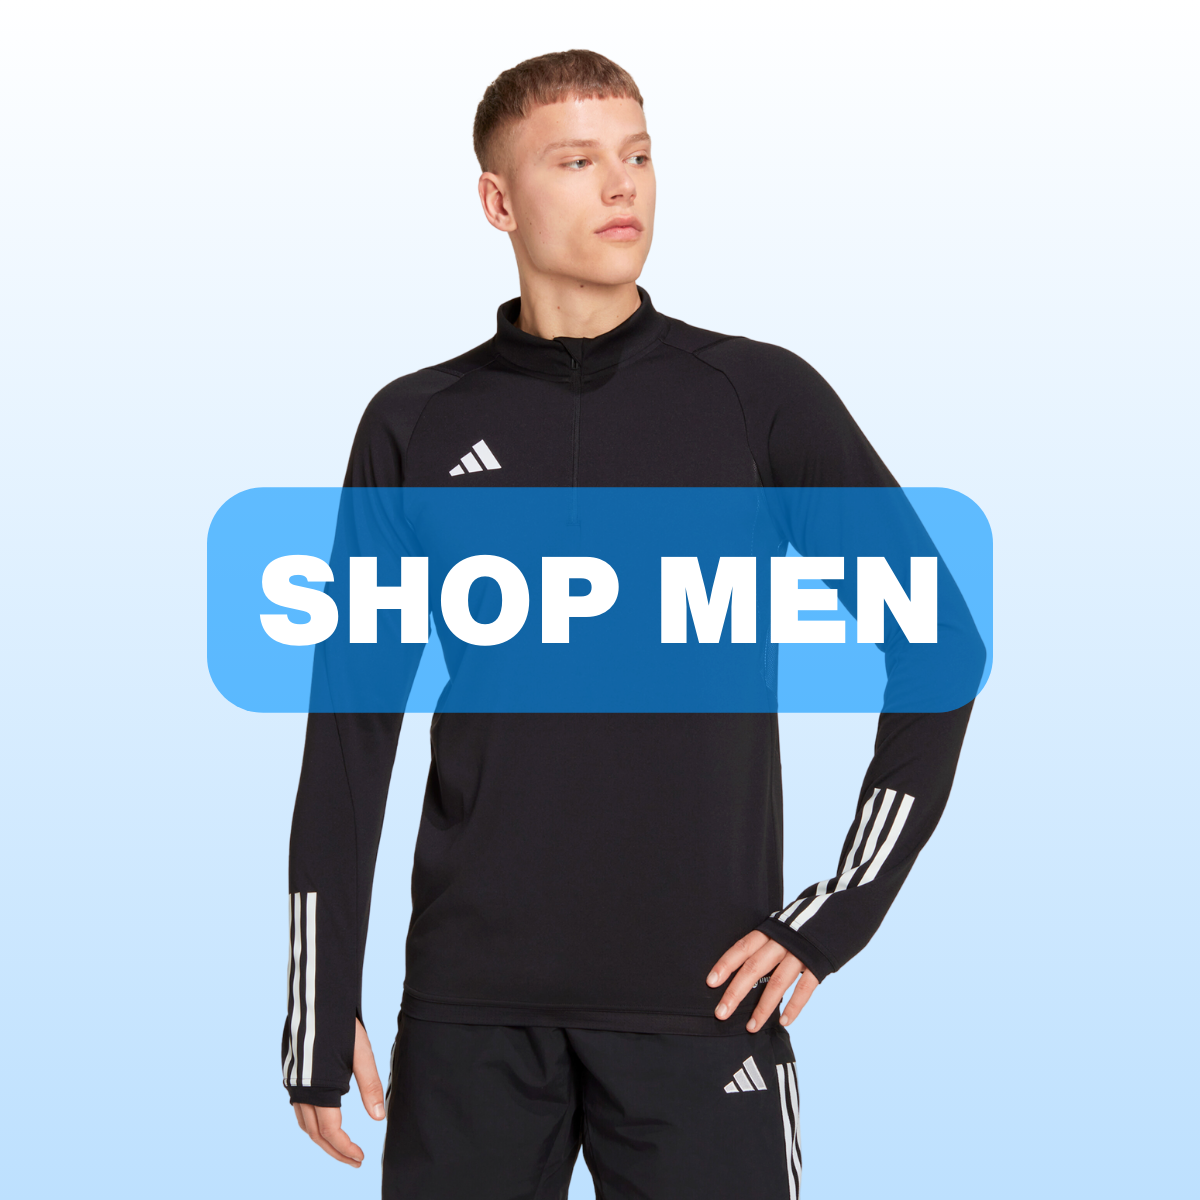 Men's Category (Clothing)